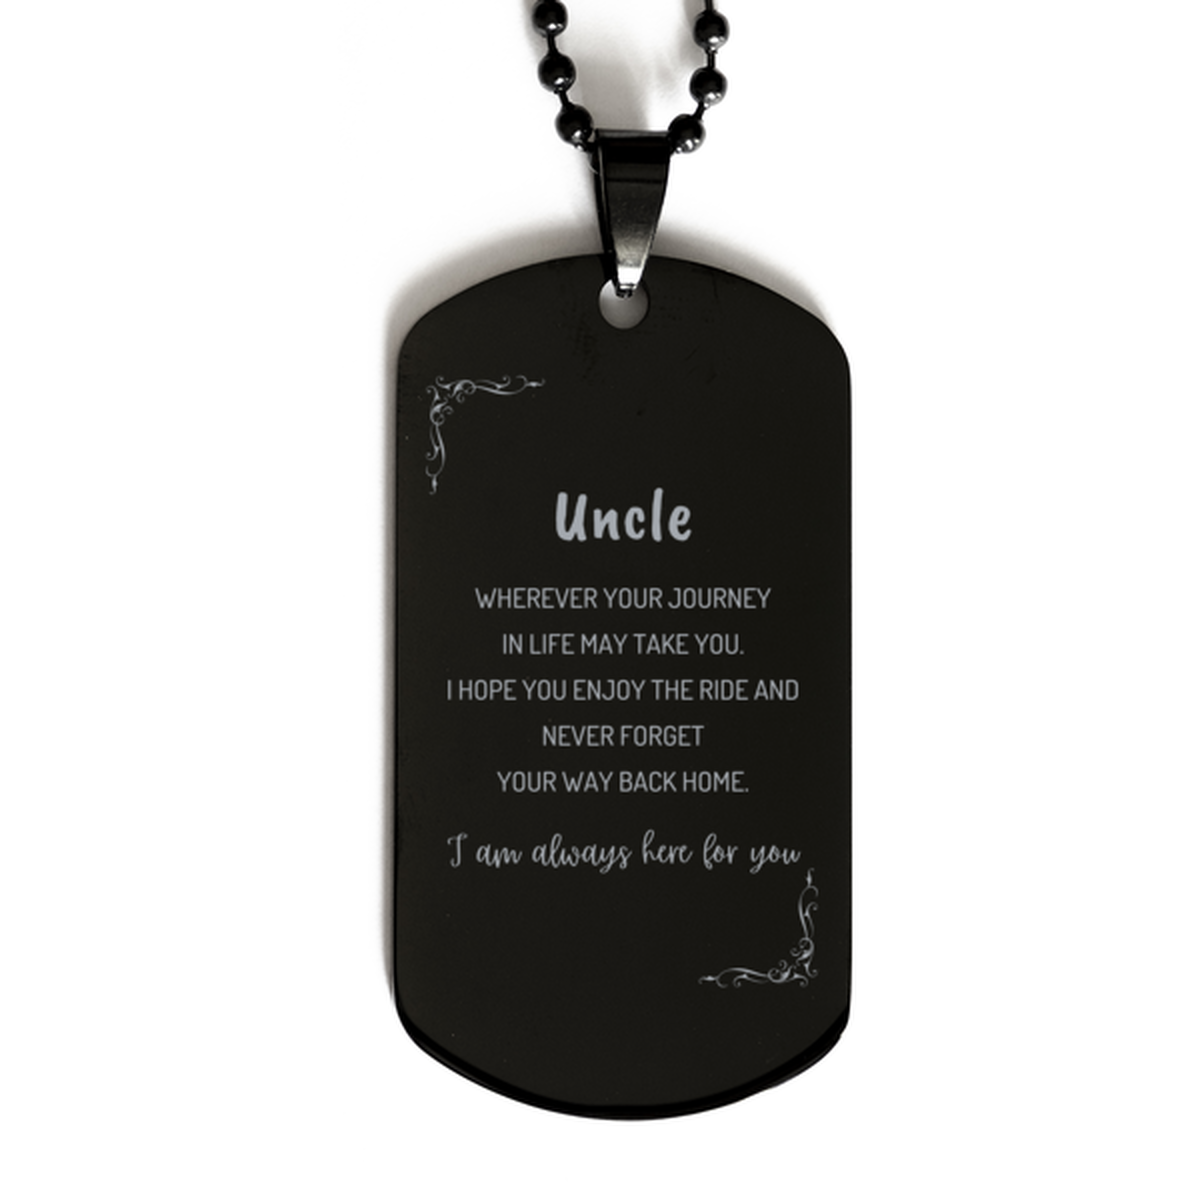 Uncle wherever your journey in life may take you, I am always here for you Uncle Black Dog Tag, Awesome Christmas Gifts For Uncle, Uncle Birthday Gifts for Men Women Family Loved One